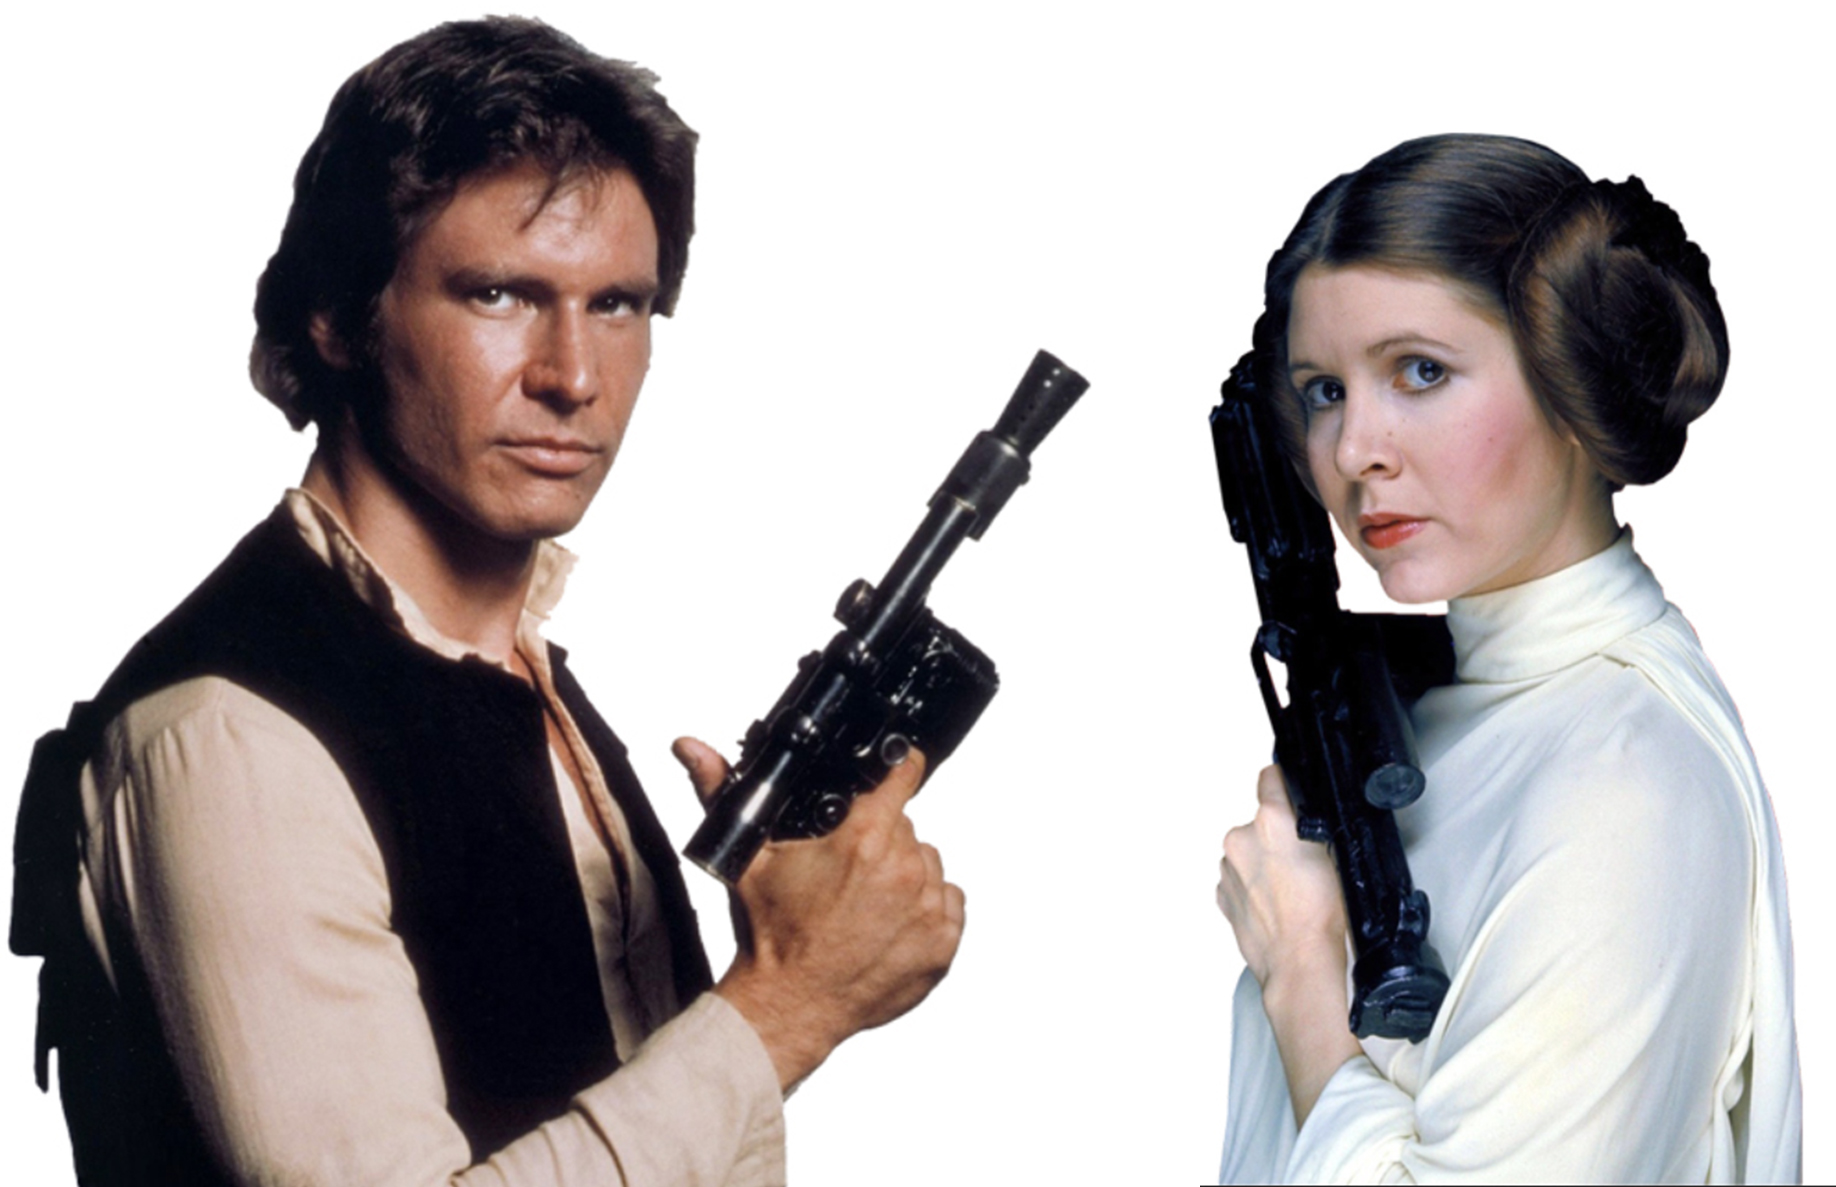 ancla pérdida máquina de coser Turns out Princess Leia and Han Solo hooked up in real life - NZ Herald